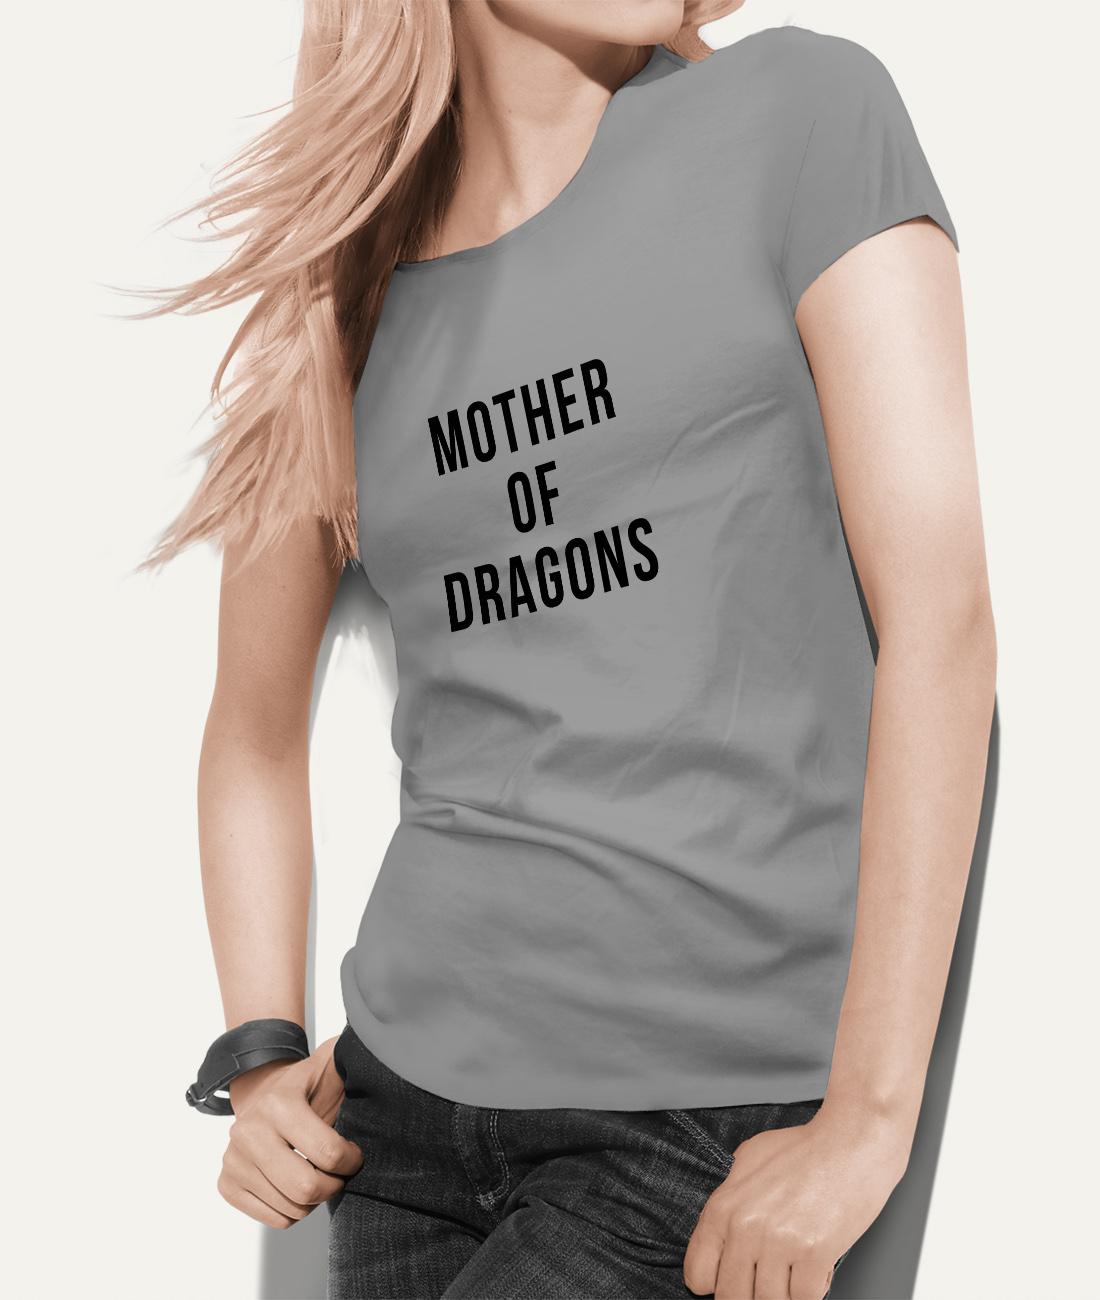 Tshirt Mother of dragons